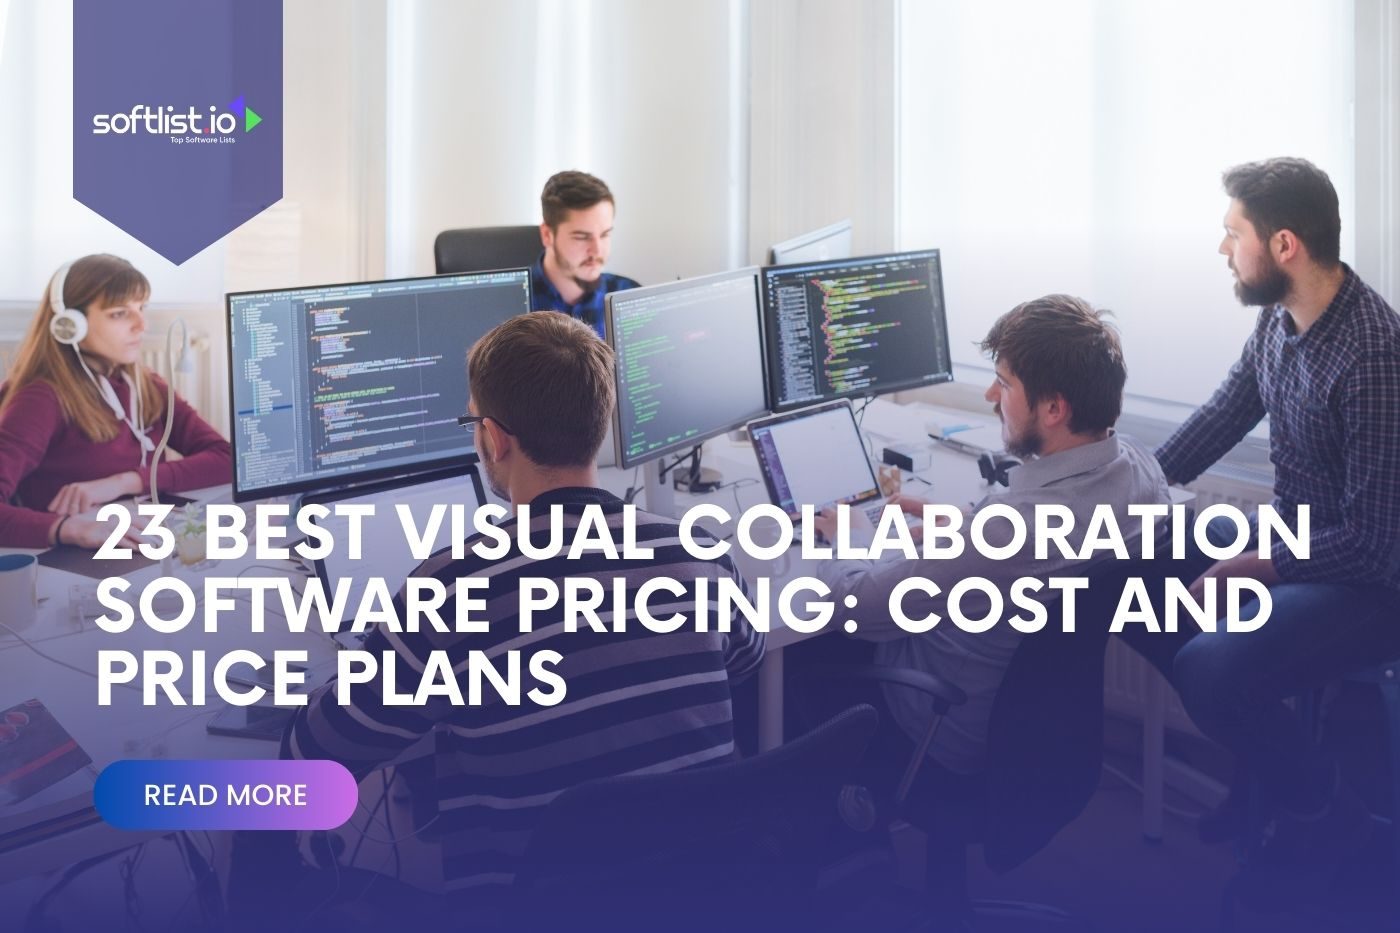 23 Best Visual Collaboration Software Pricing